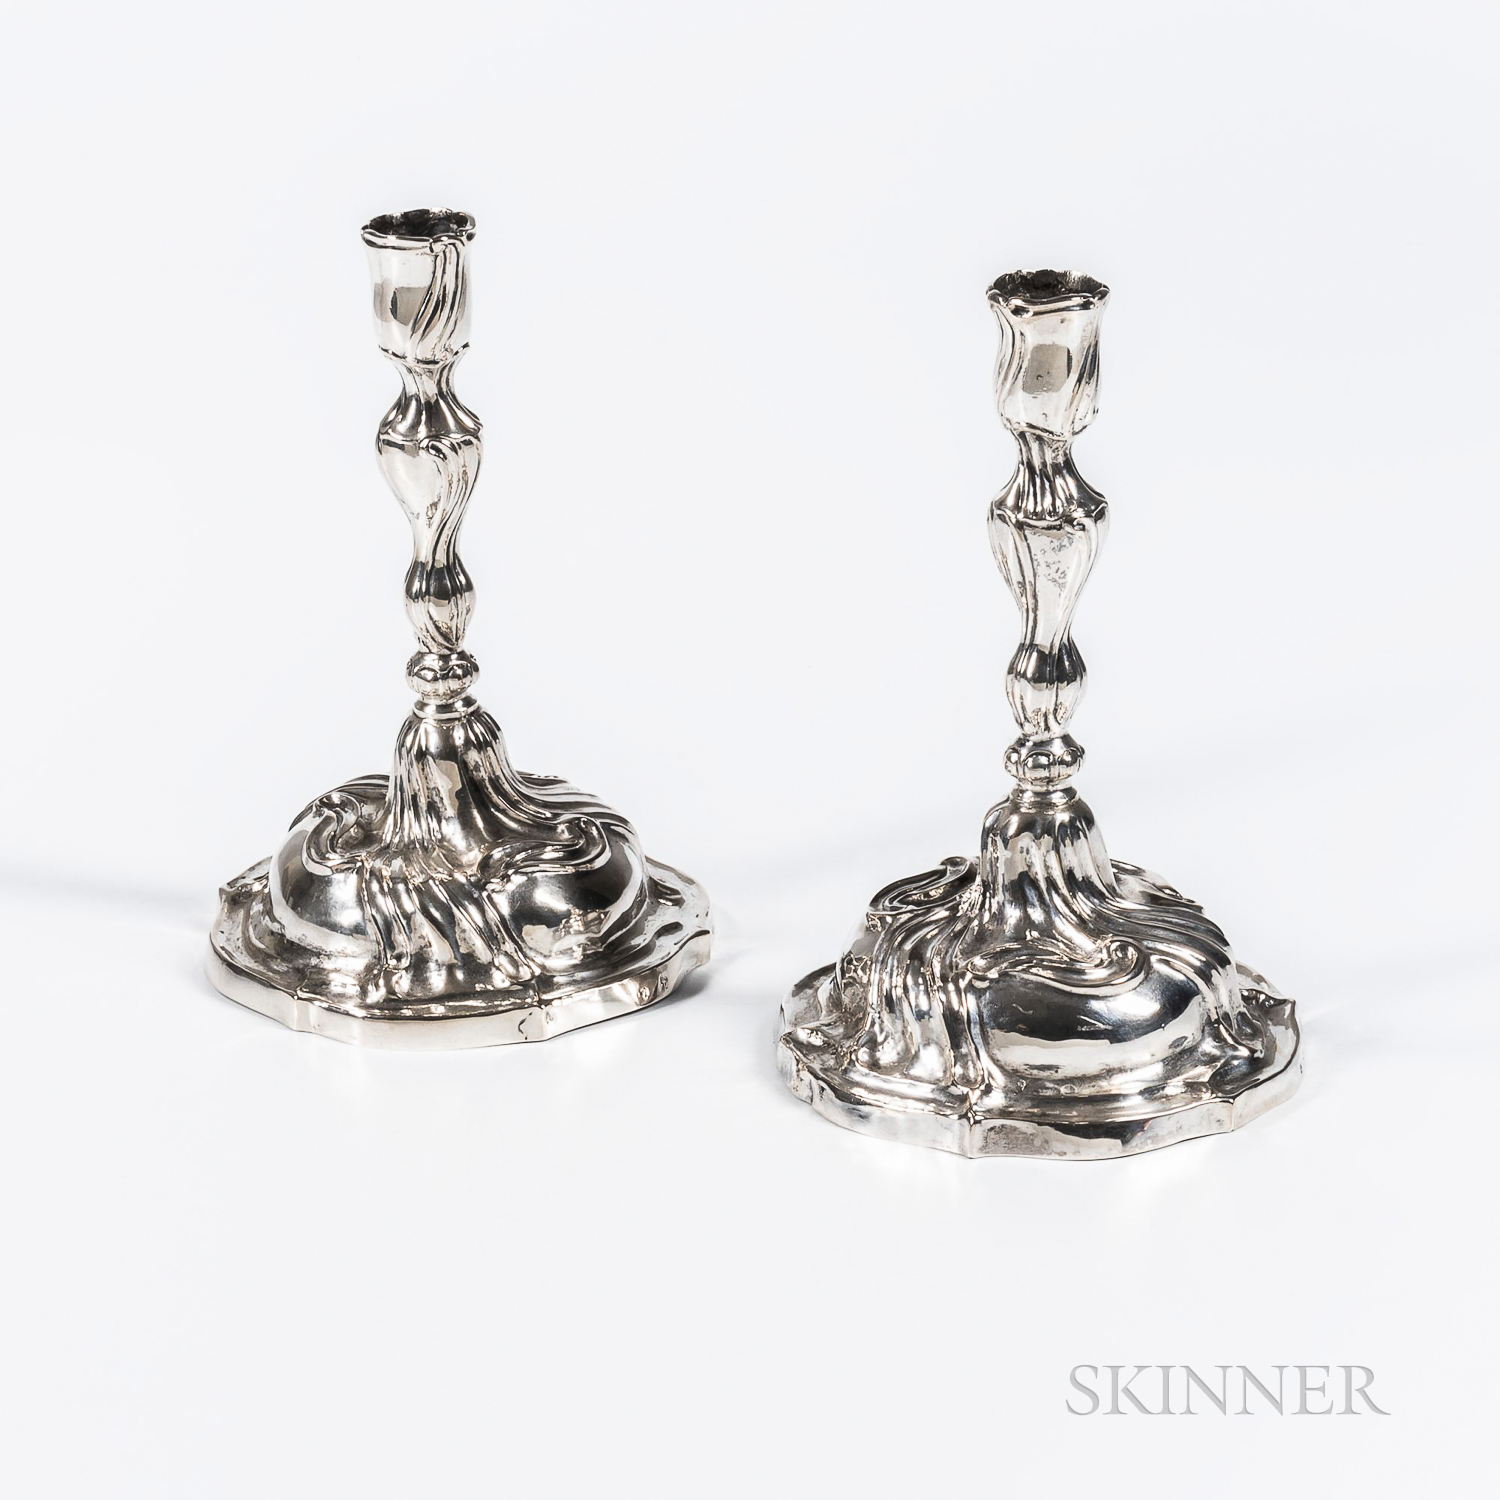 Pair of Continental Silver Candlesticks, probably Germany, 18th century, bearing 12 loth standard an